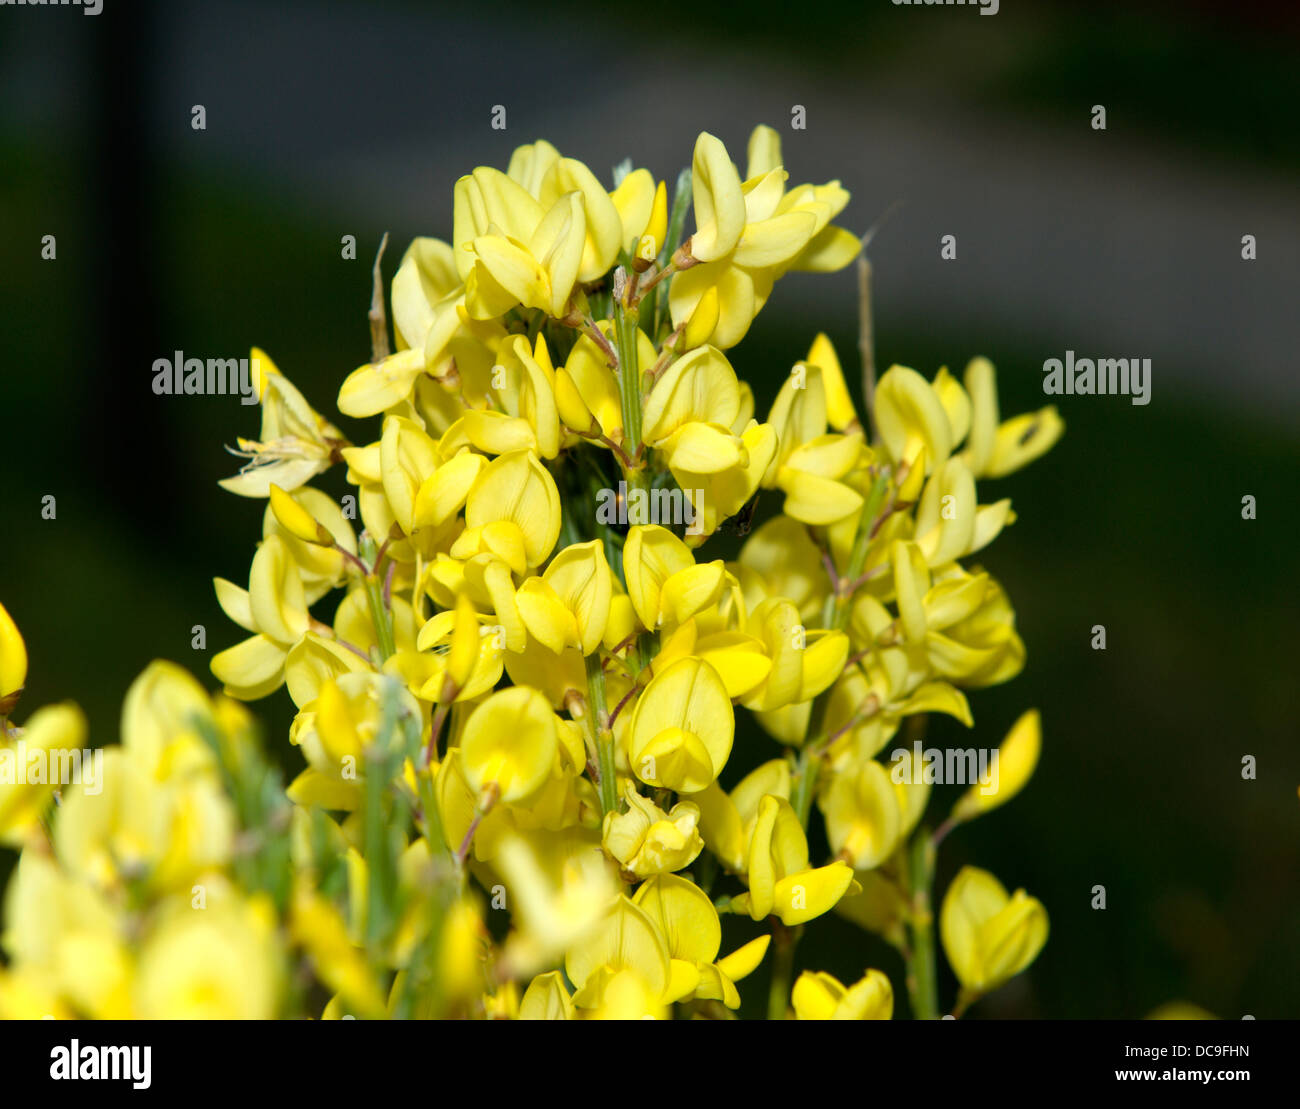 Detail of the pea-like flowers of a Cytisus x praecox Allgold or broom Stock Photo